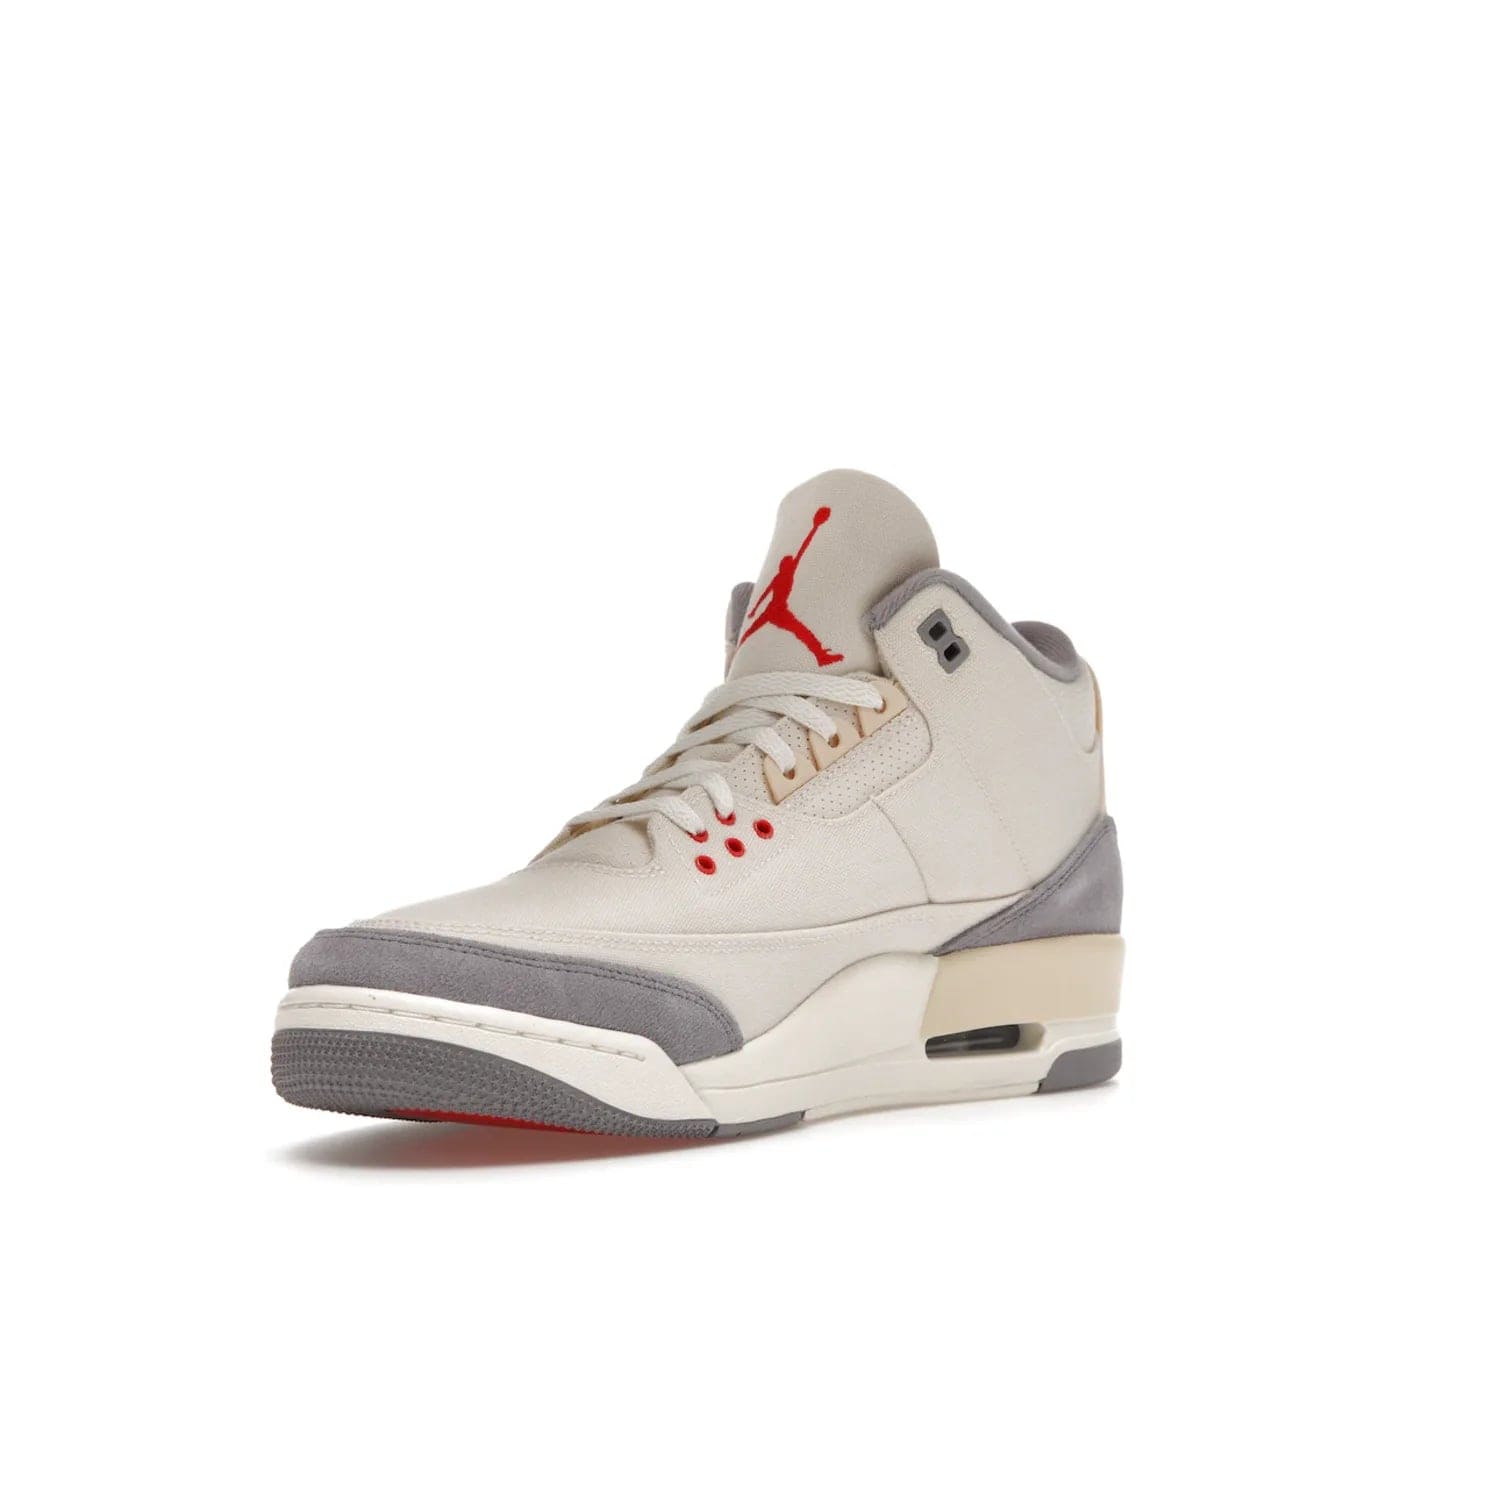 Jordan 3 Retro Muslin - Image 14 - Only at www.BallersClubKickz.com - Eye-catching Air Jordan 3 Retro Muslin in a neutral palette of grey, cream, and red. Featuring canvas upper, suede overlays and white/grey Air Max sole. Available in March 2022.